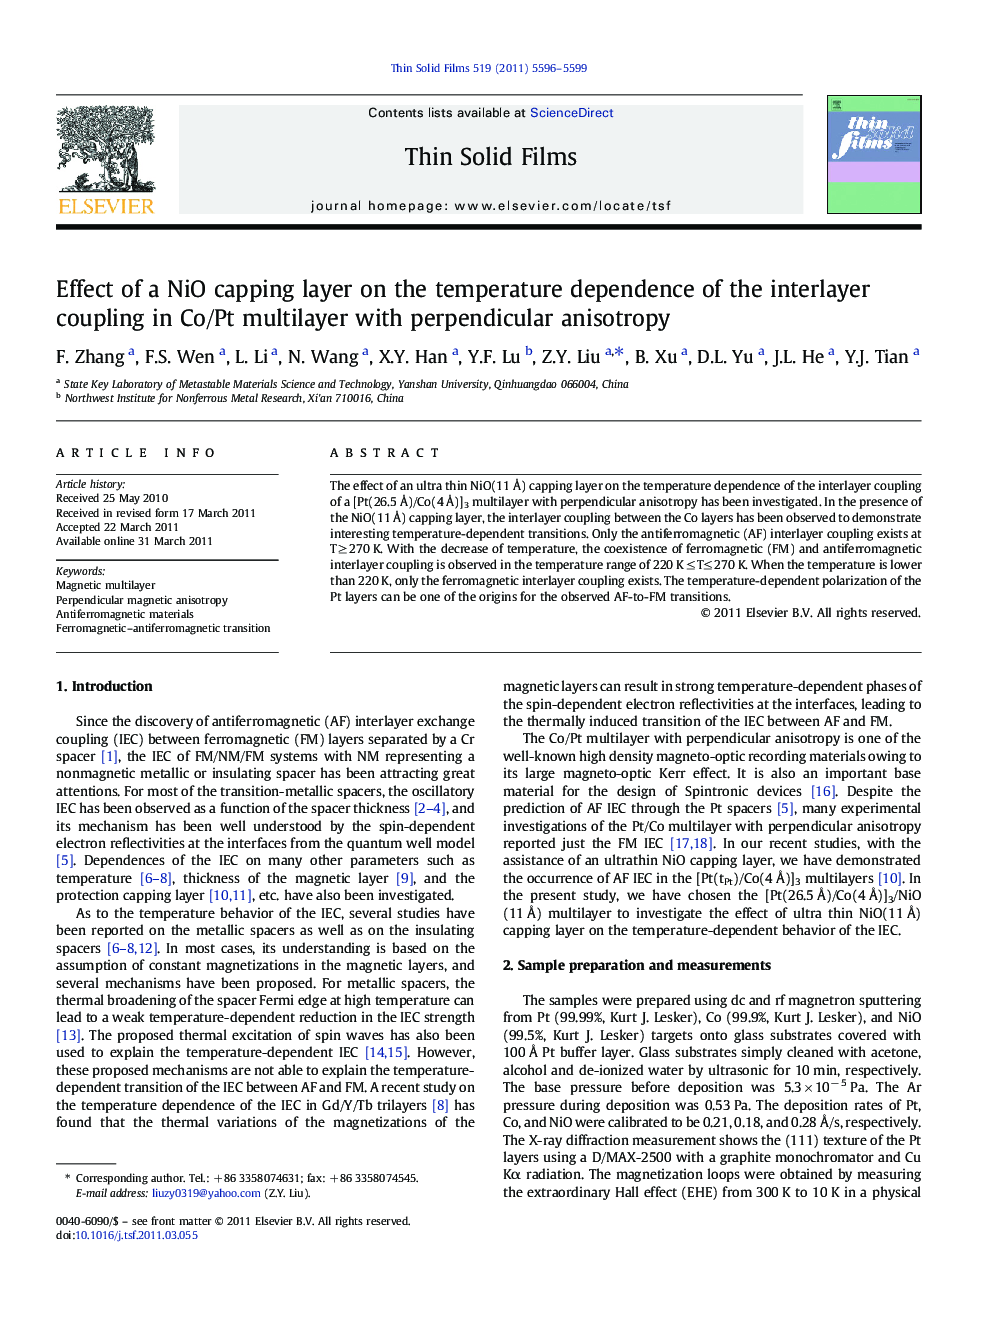 Effect of a NiO capping layer on the temperature dependence of the interlayer coupling in Co/Pt multilayer with perpendicular anisotropy